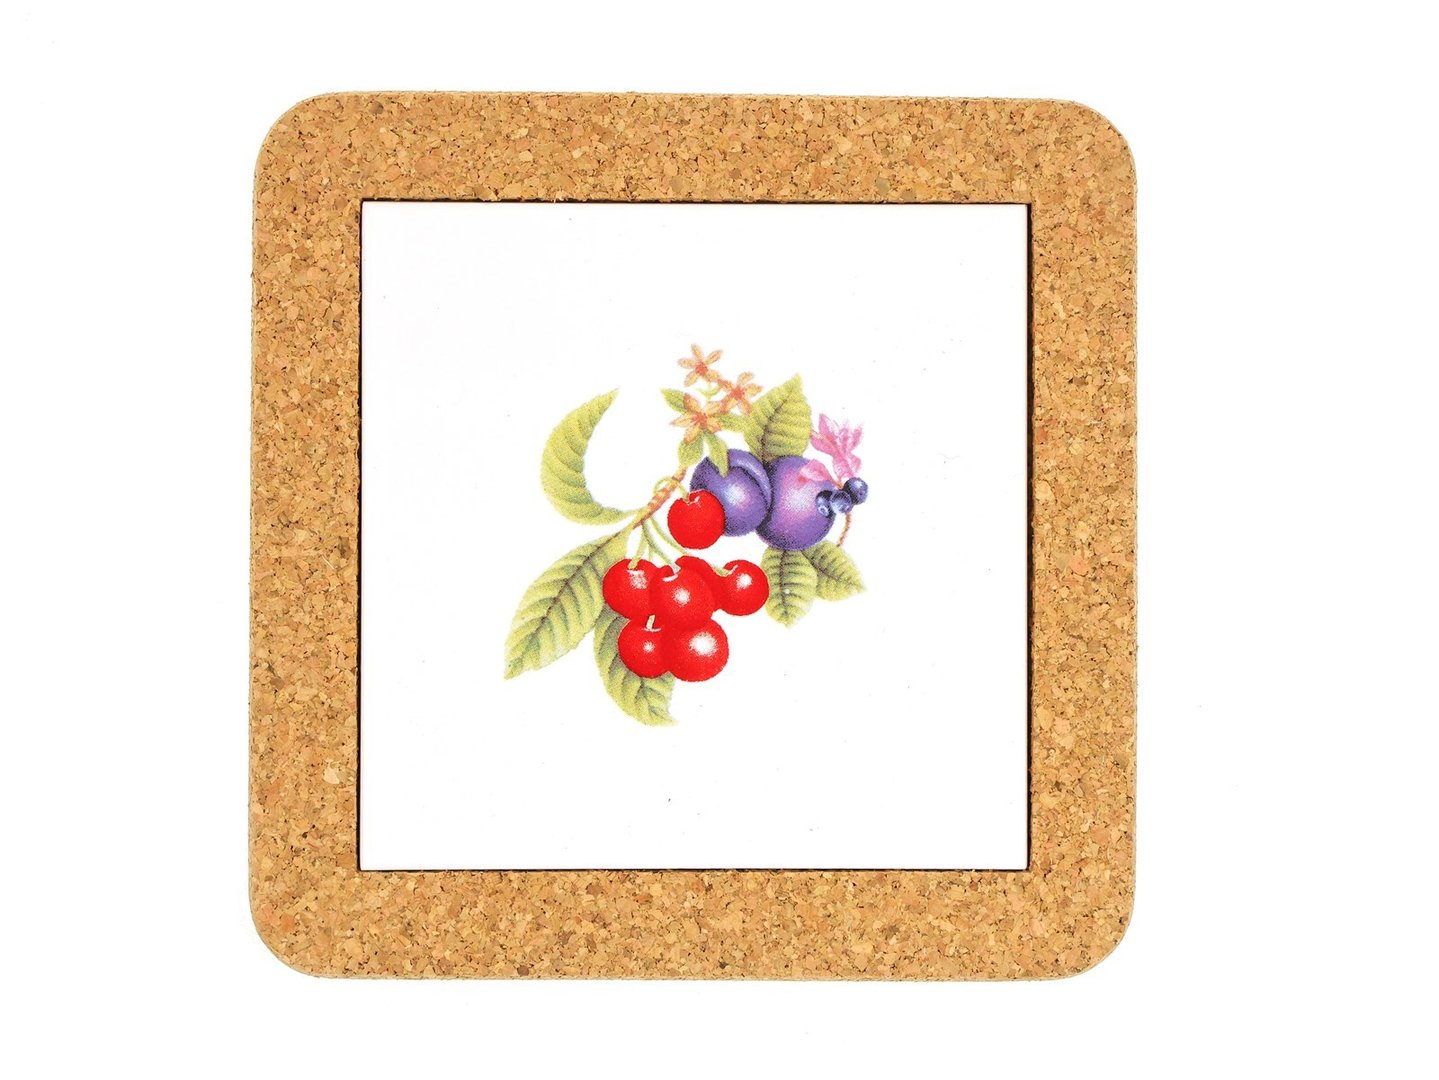 7901 Coaster With Tile Fruits Cherry